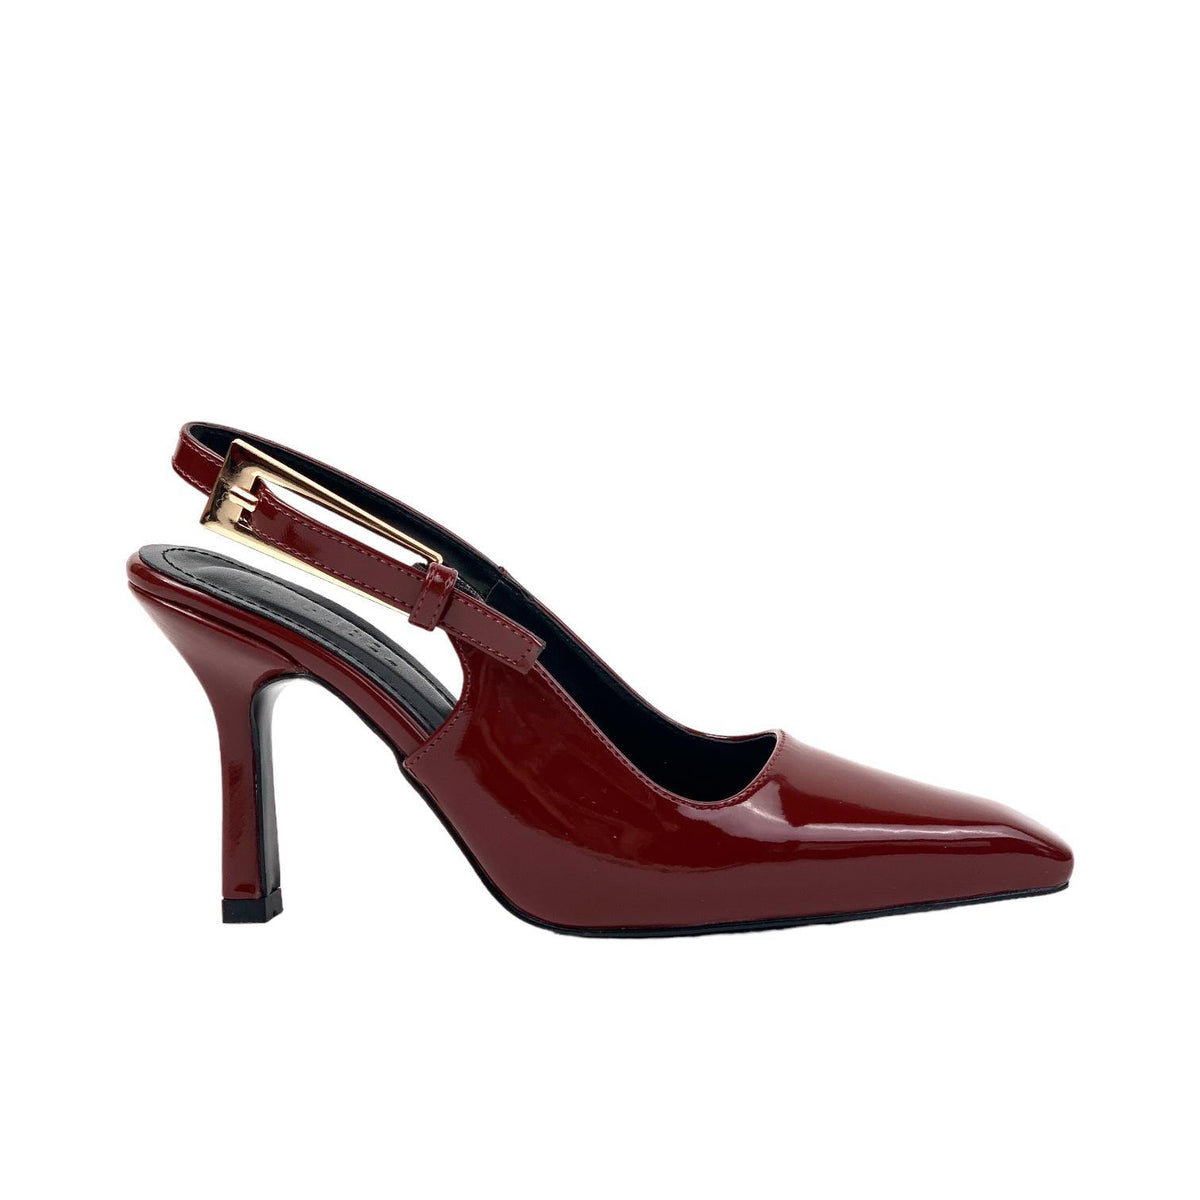 Women's Lery Burgundy Patent Leather Heeled Shoes 9 cm - STREETMODE ™